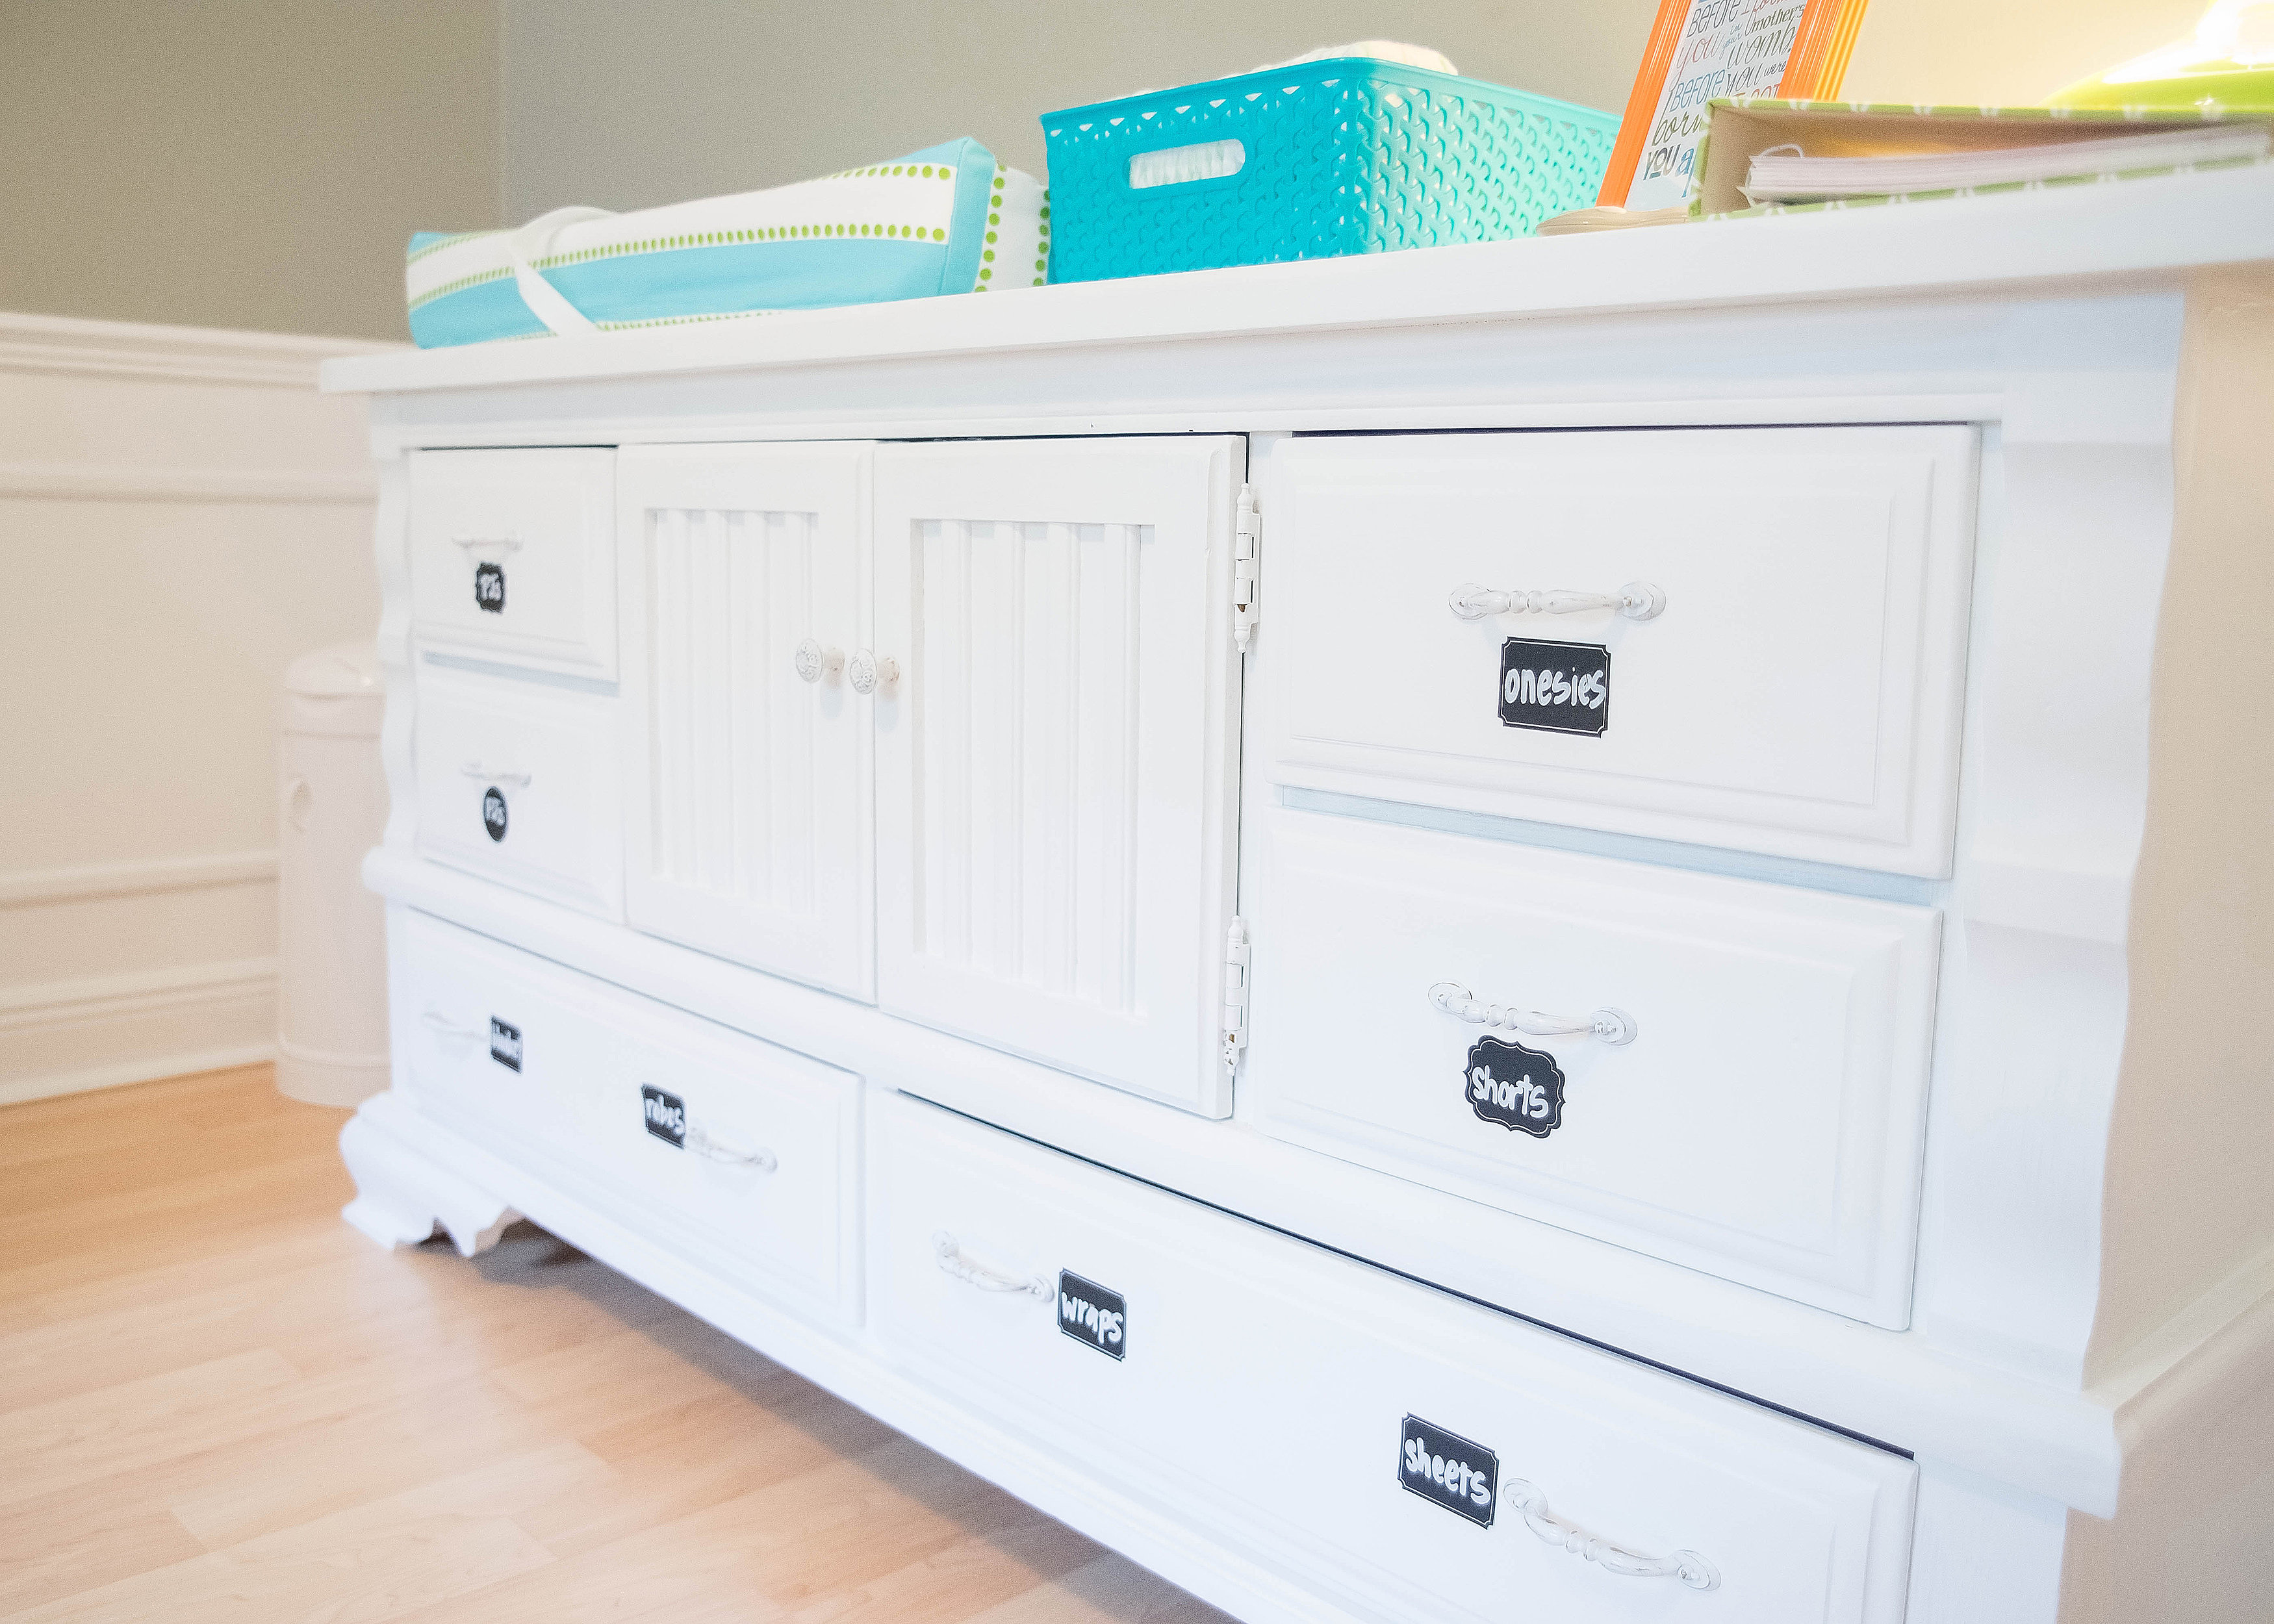 Refinished Dresser with Chalkboard Labels for Each Drawer